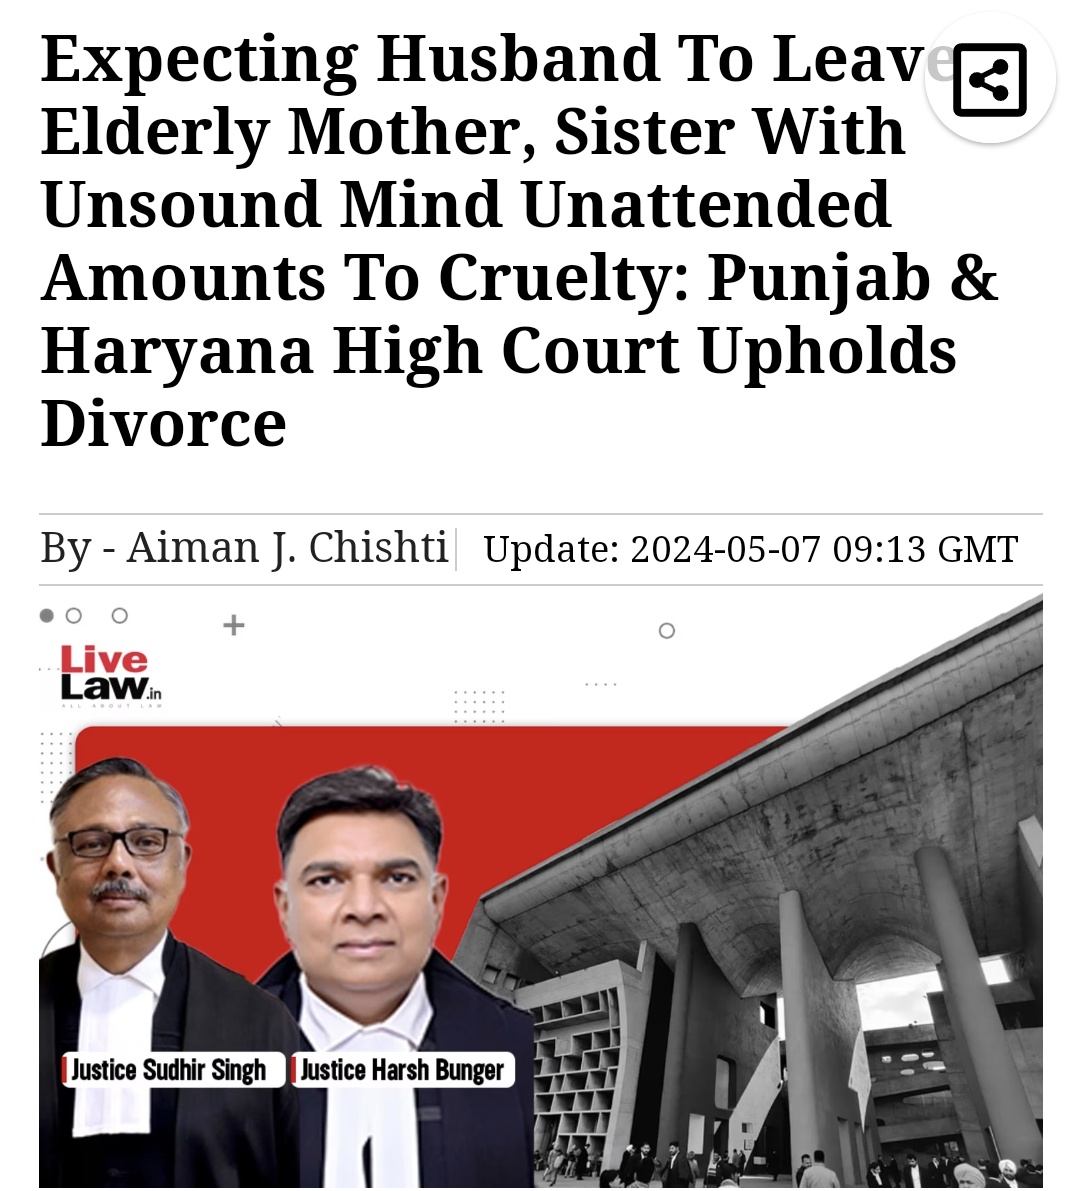 My wife also wanted the same, not only my wife but her mother also wanted the same and later her father also wanted the same

I refused & as expected many #FalseCases against me that too from outstation courts, they thought that I would give up after facing #FalseCases

#MenToo